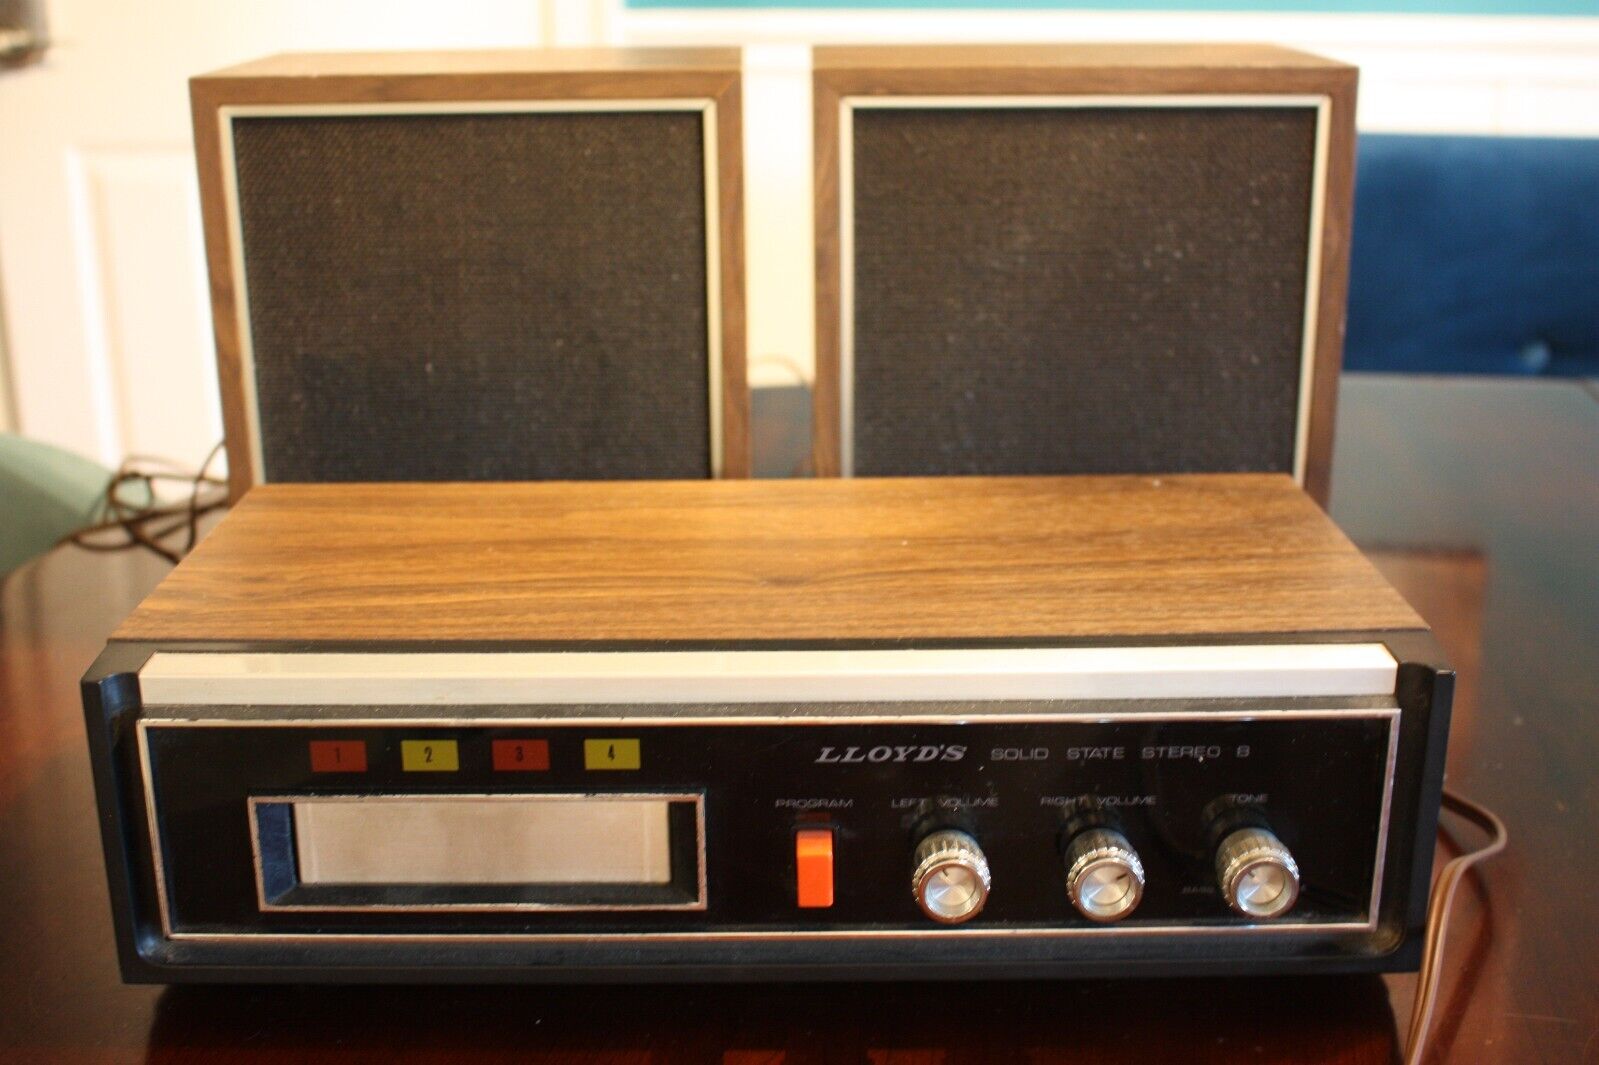 VINTAGE LLOYD'S 8-TRACK PLAYER WITH SPEAKERS MODEL 2V61W-07A TESTED WORKS